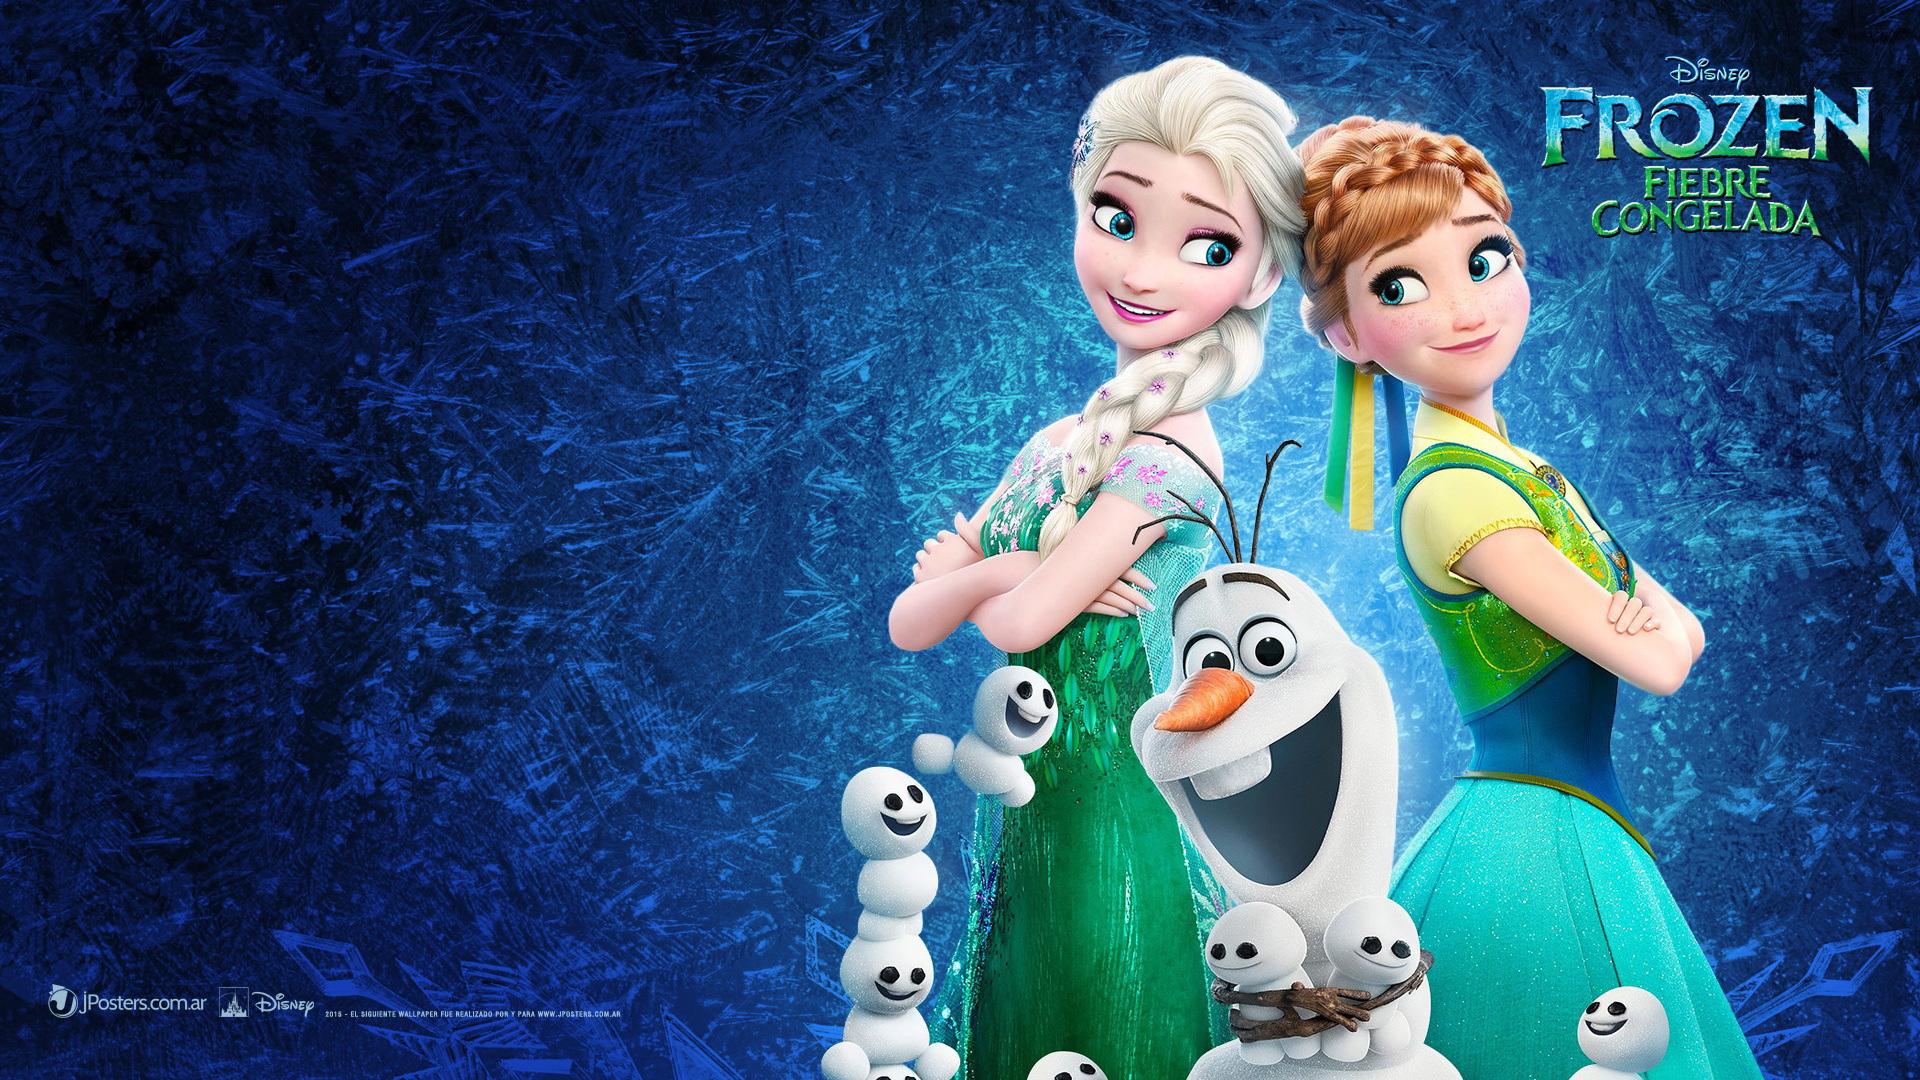 Frozen Fever Wallpapers and Background Images   stmednet